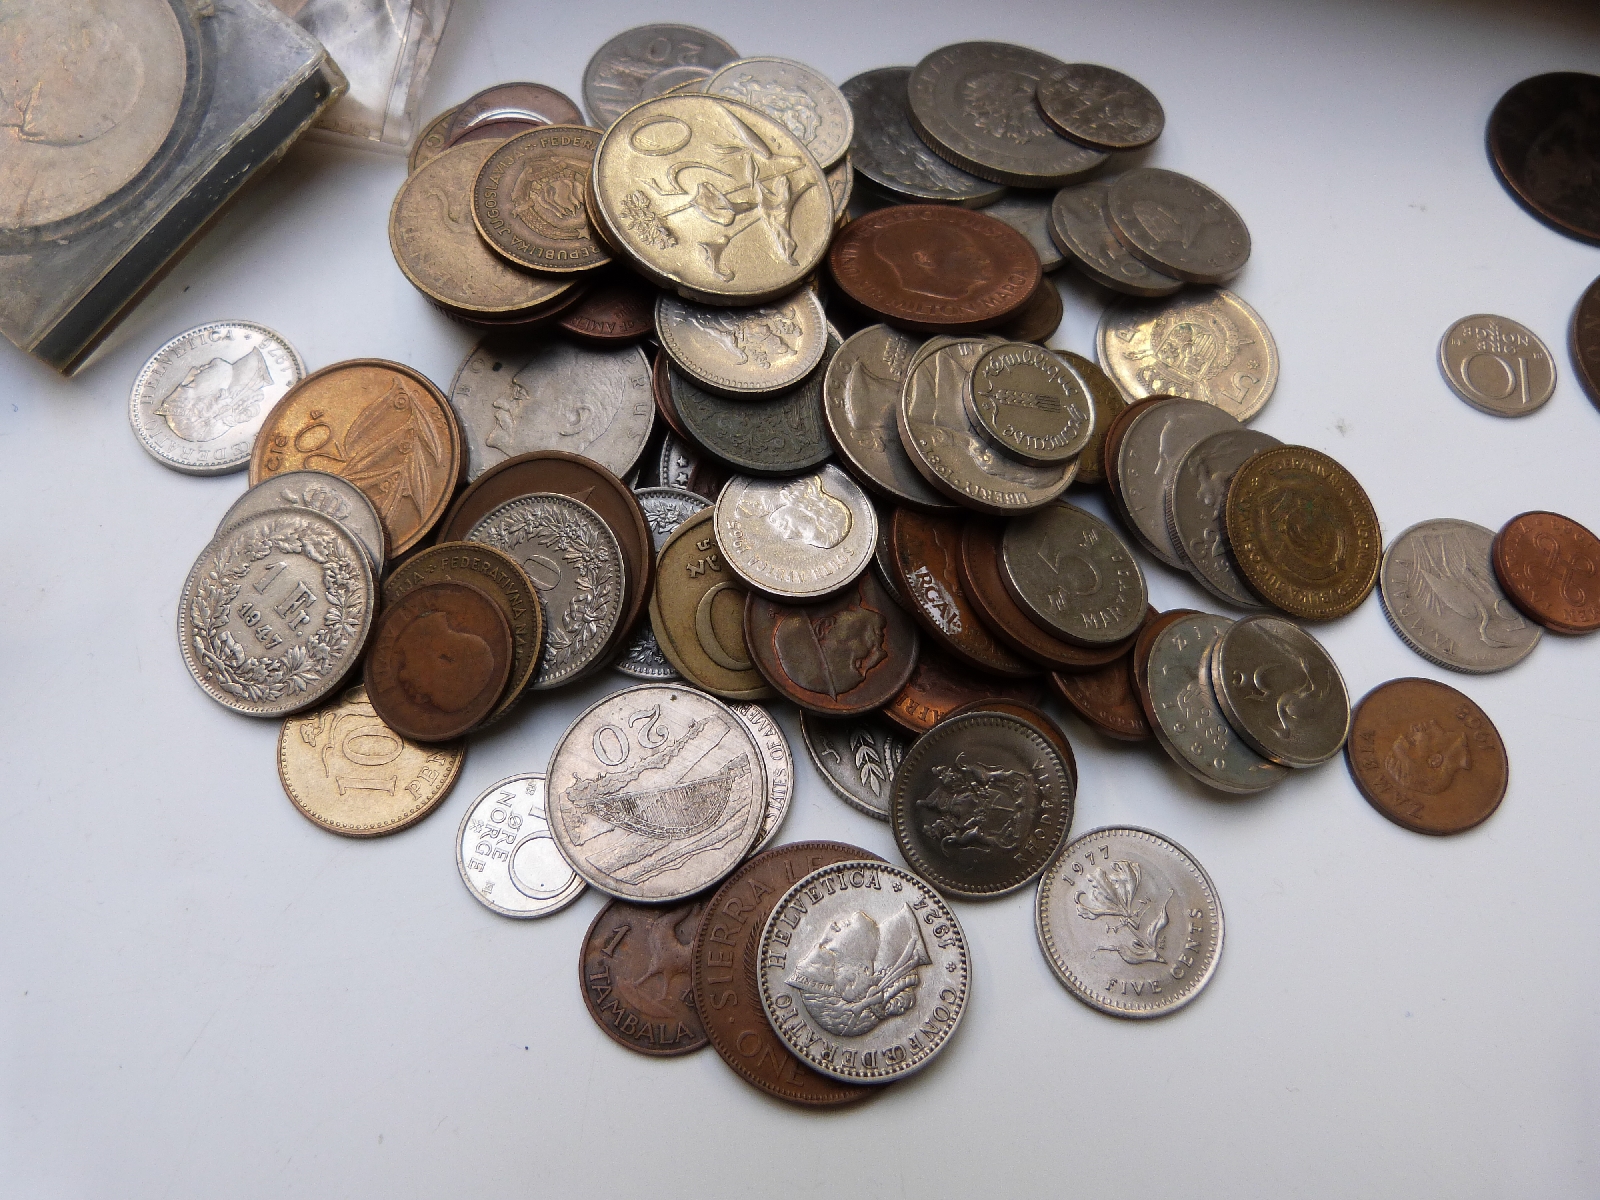 A large collection of UK coinage, includes Heaton Mint pennies, redeemable decimal, some pre-1947 - Image 4 of 5